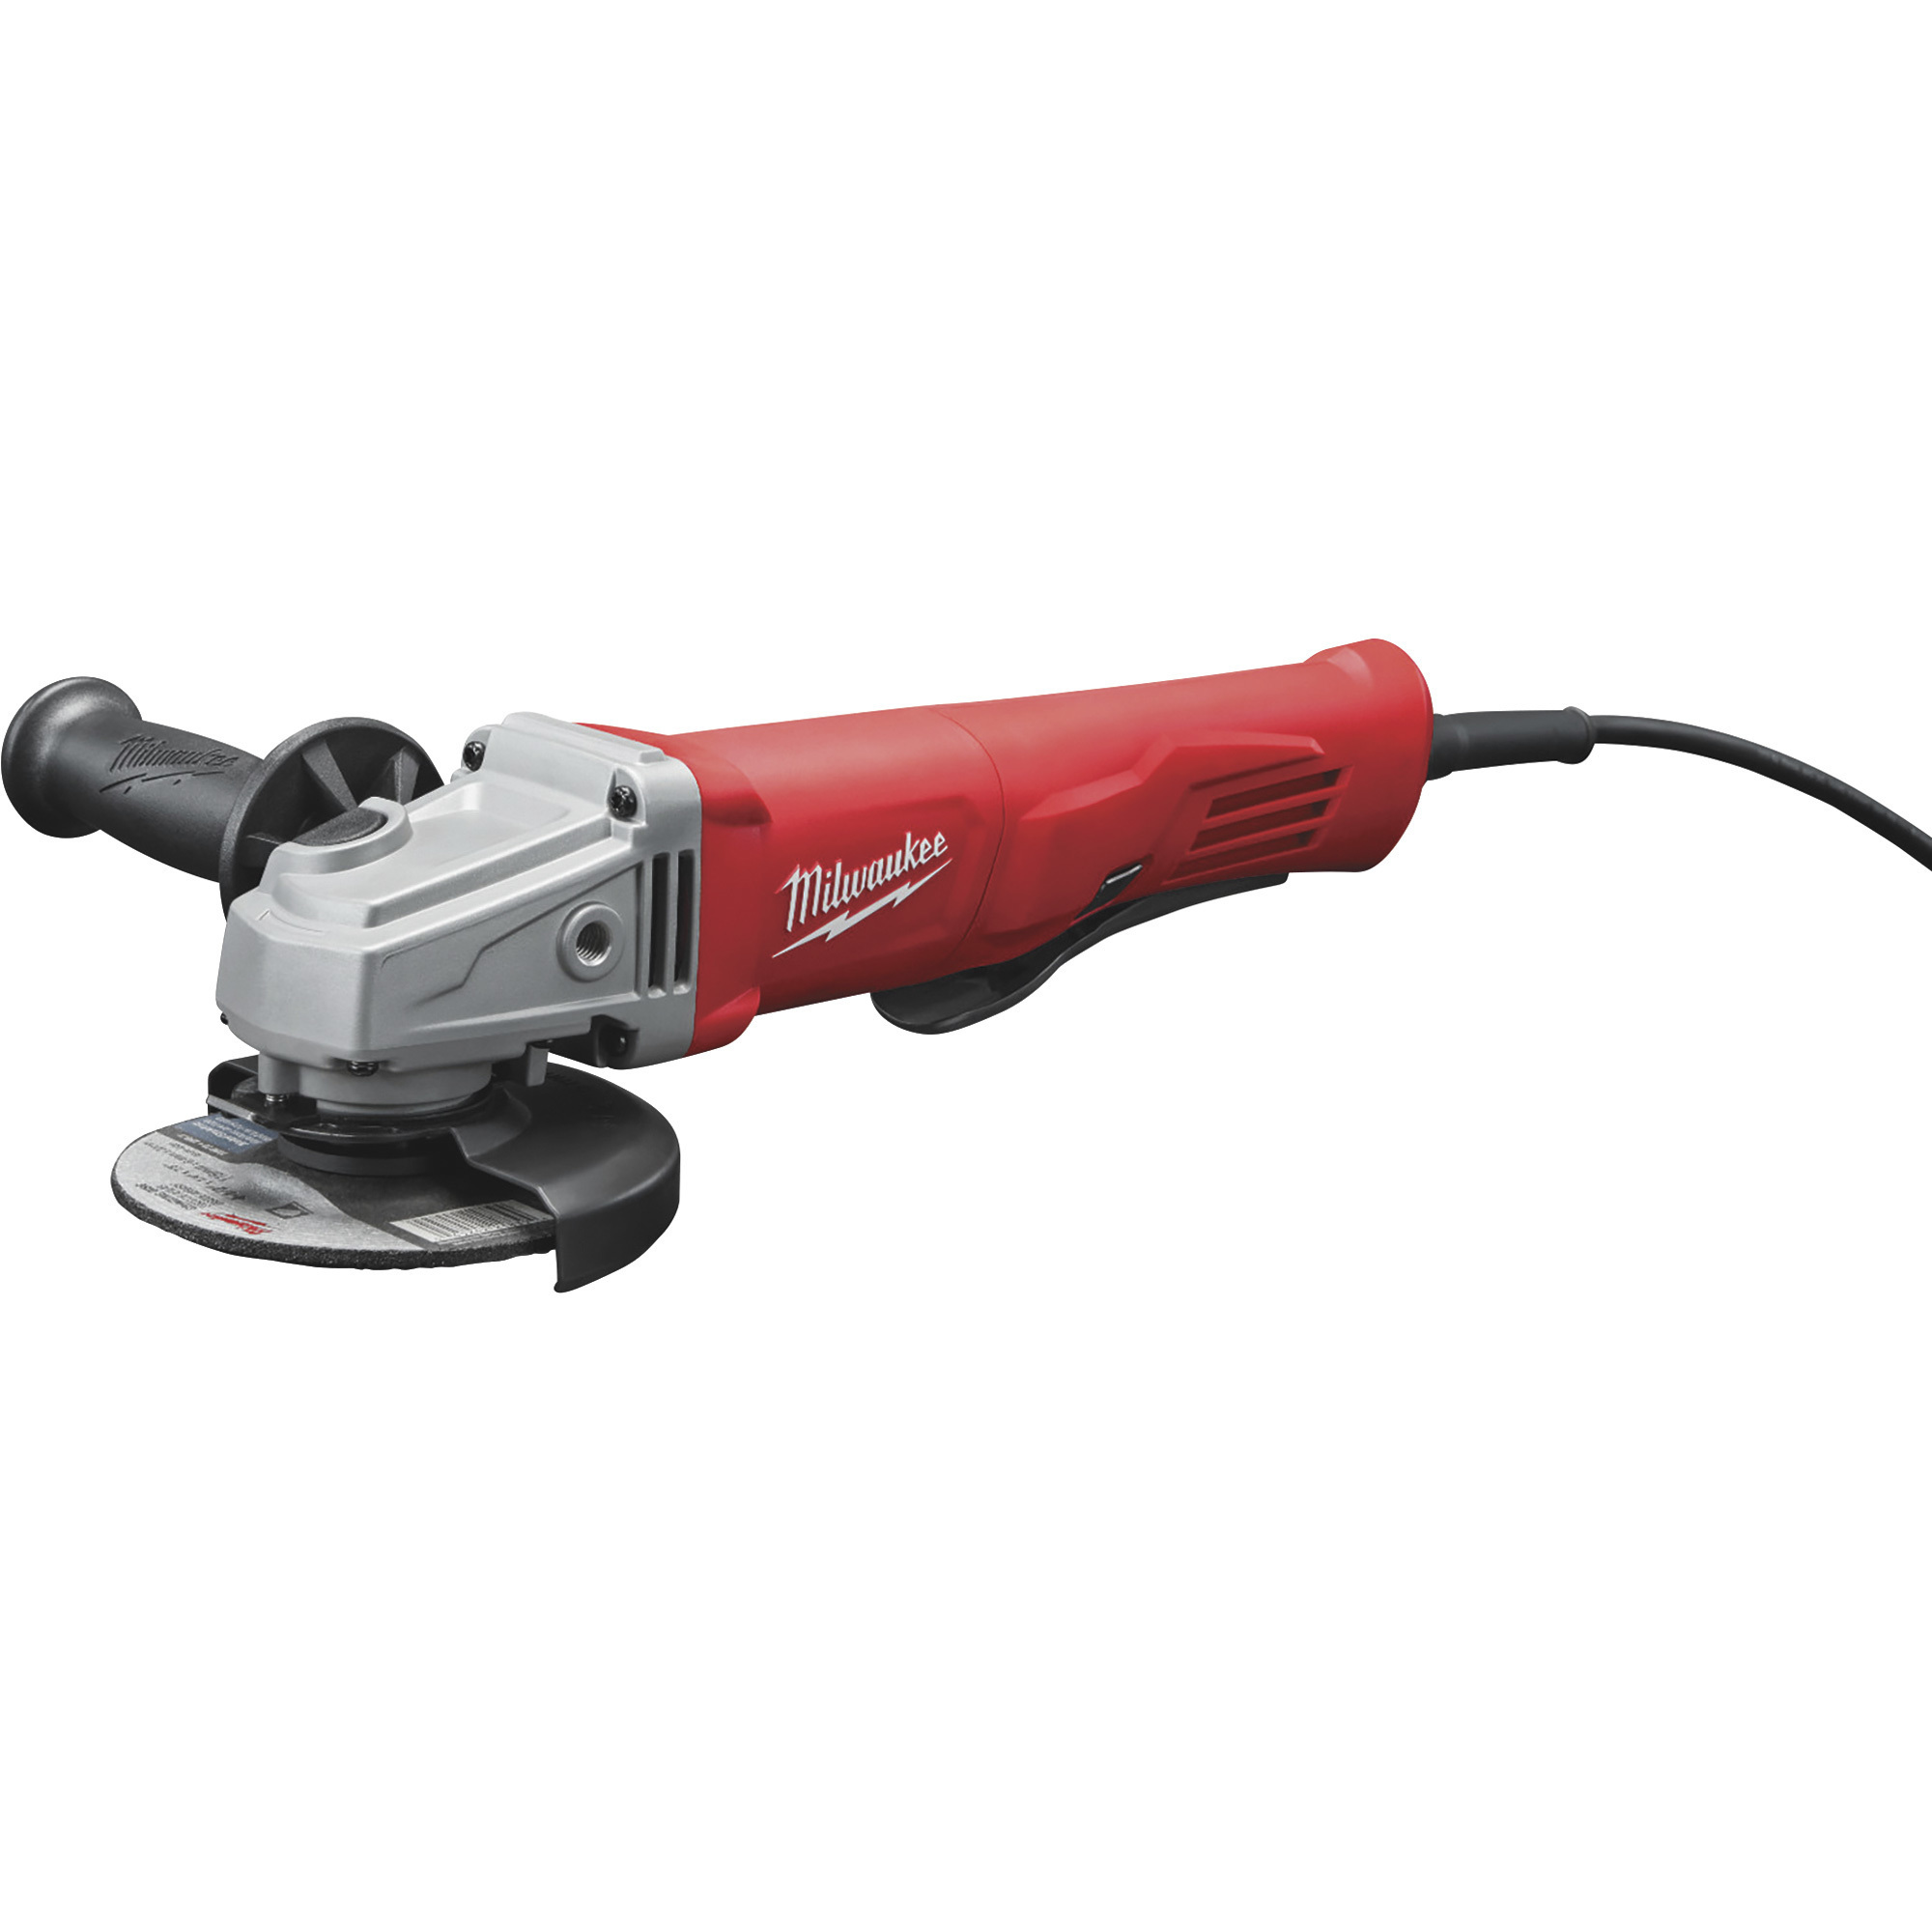 Milwaukee 1/2in. Small Angle Grinder Kit — 11 Amp, 11,000 RPM, Paddle,  Lock-On, Model# 6142-30 Northern Tool